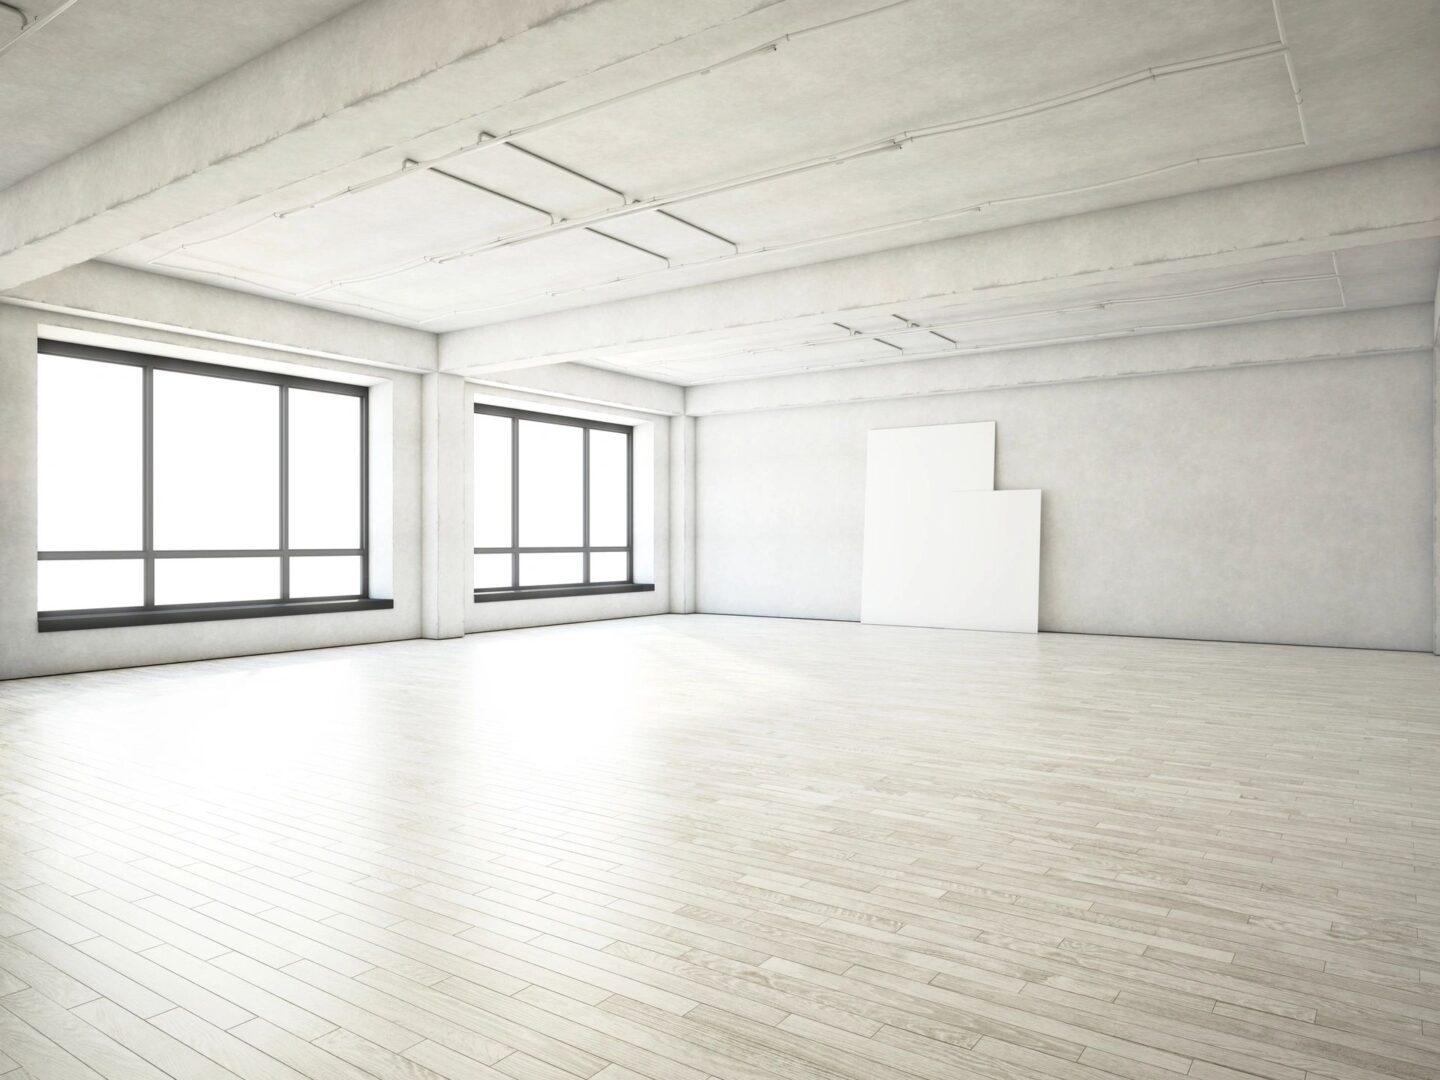 A large empty room with windows and wooden floors.